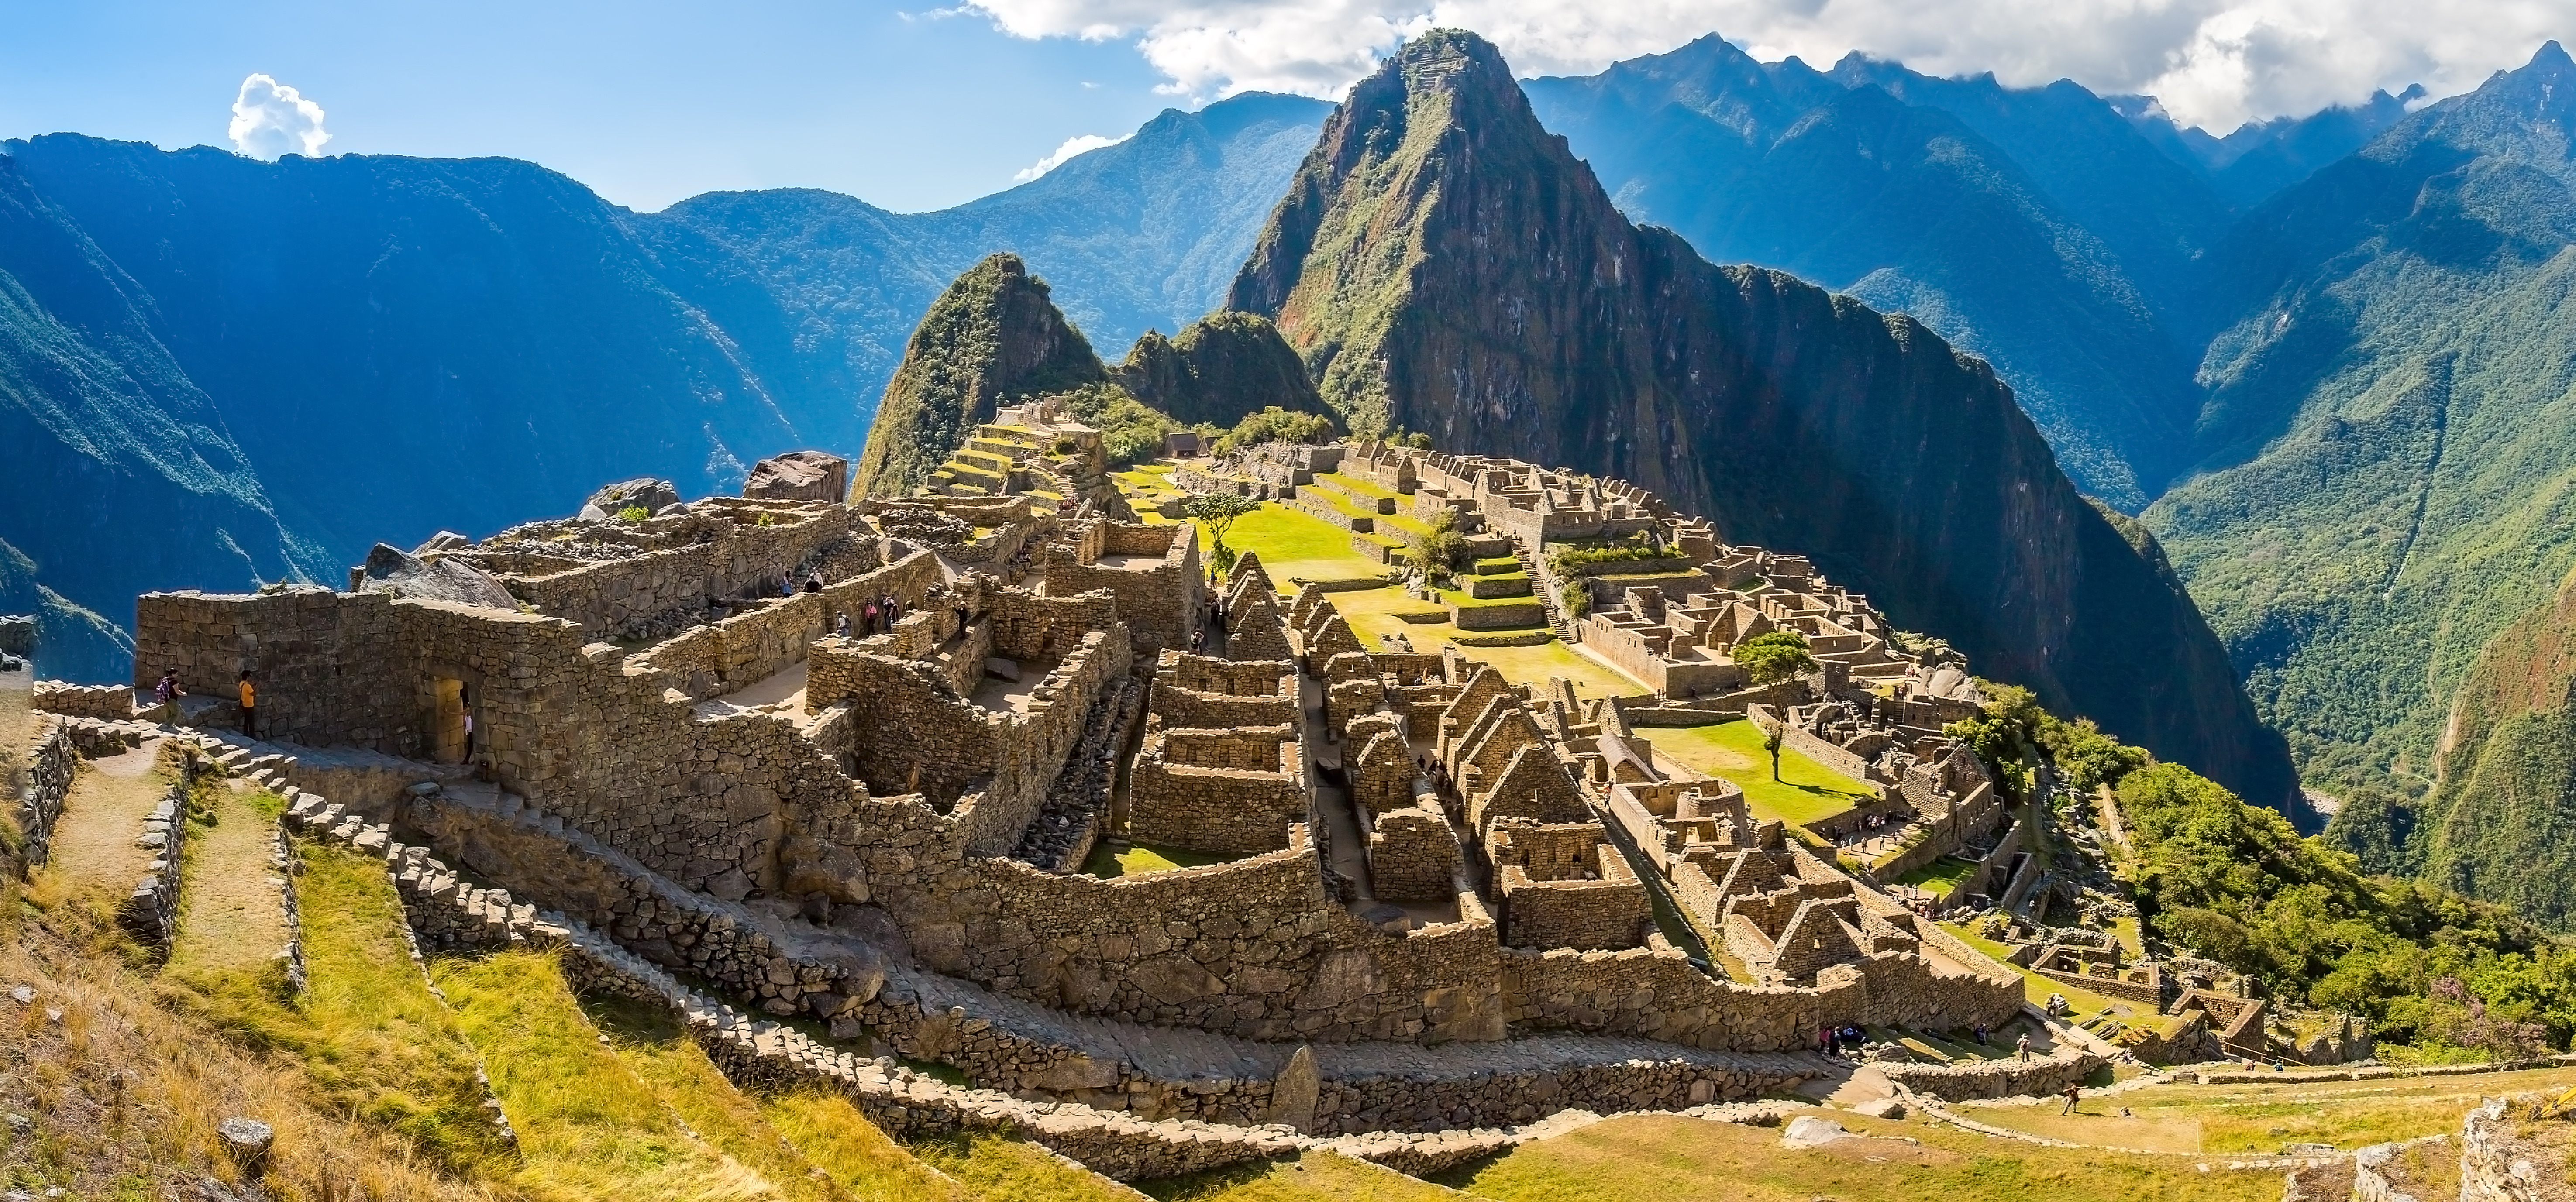 Image shows historic city of Machu Picchu with terraced city in foreground and mountain ranges in background